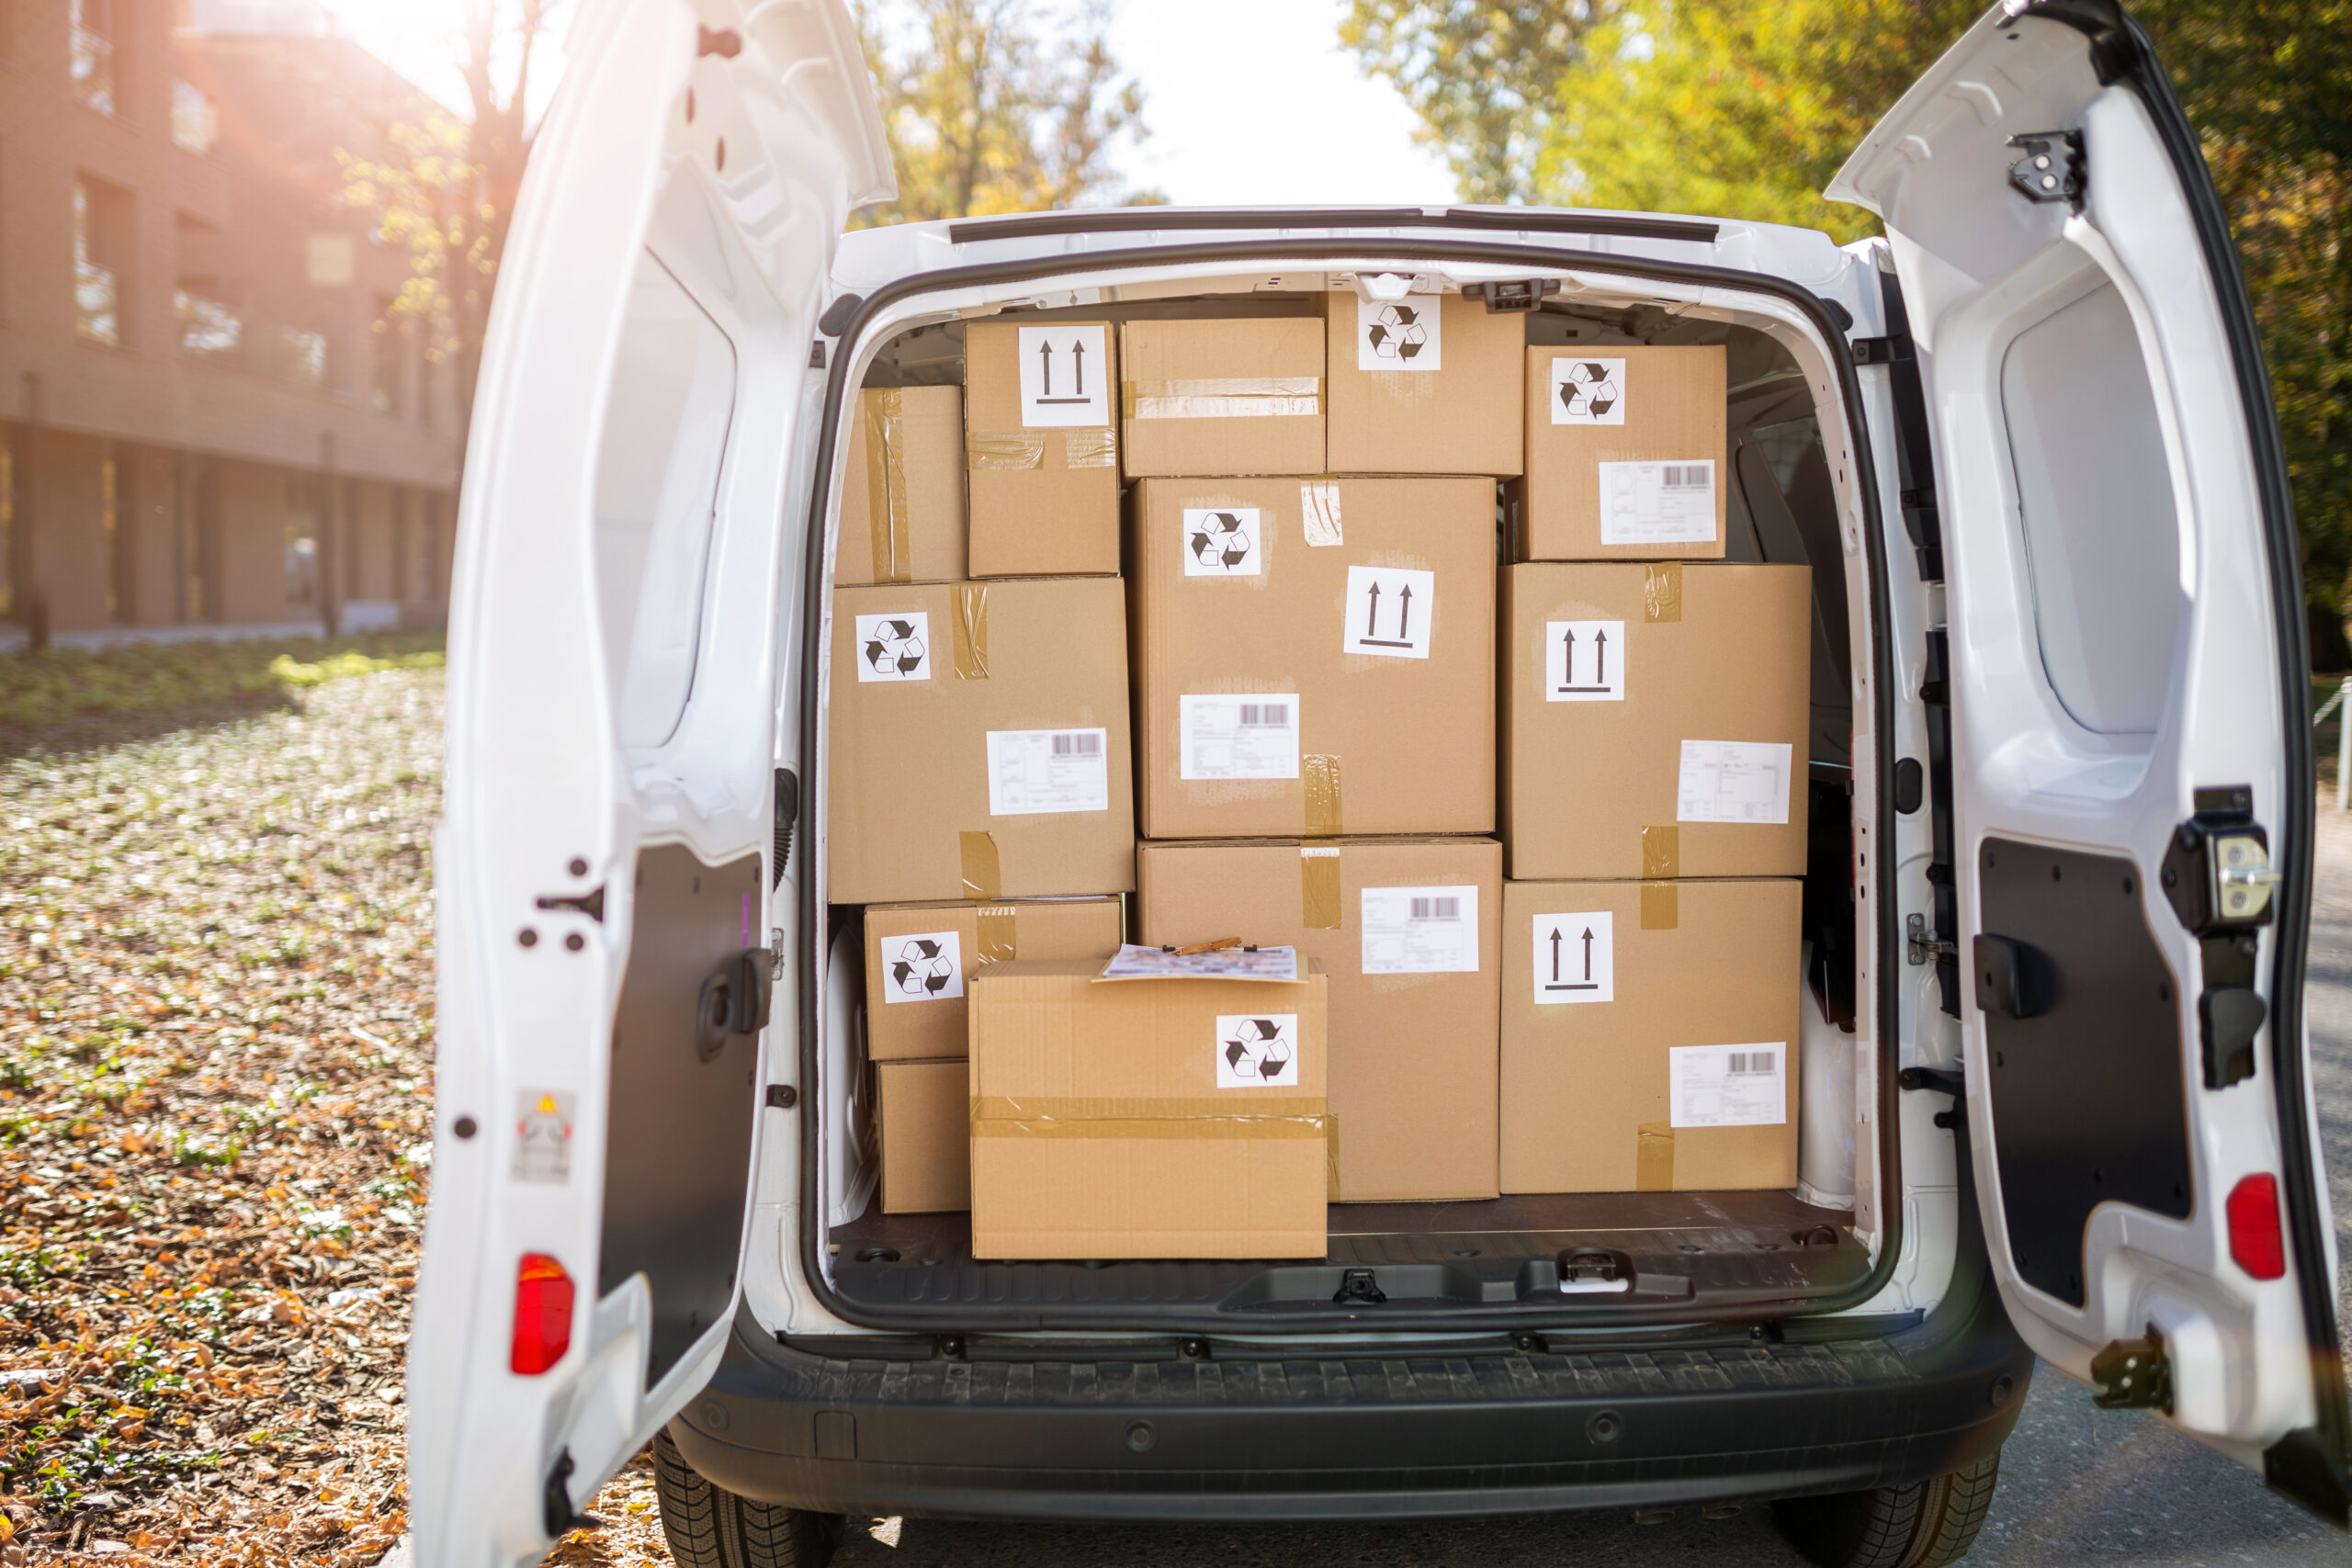 Study shows delivery businesses braced for increasing demand and expectations in 2023